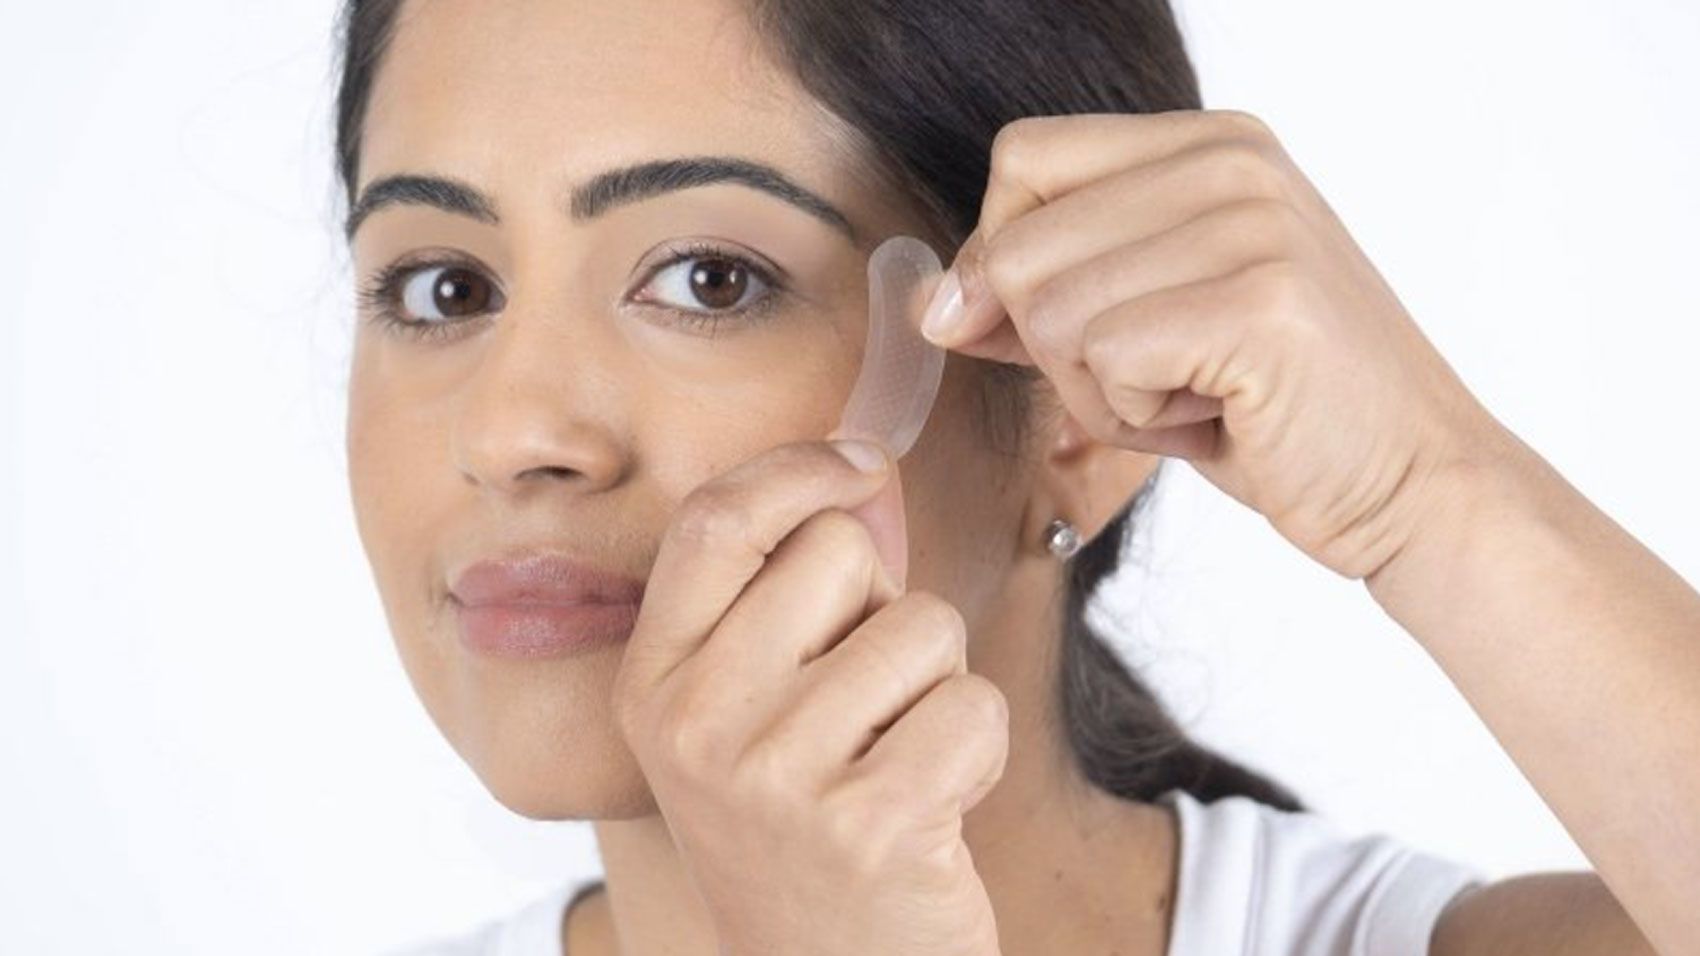 this Botox care more about skin Wrinkle patch CNN review: Learn | alternative Underscored